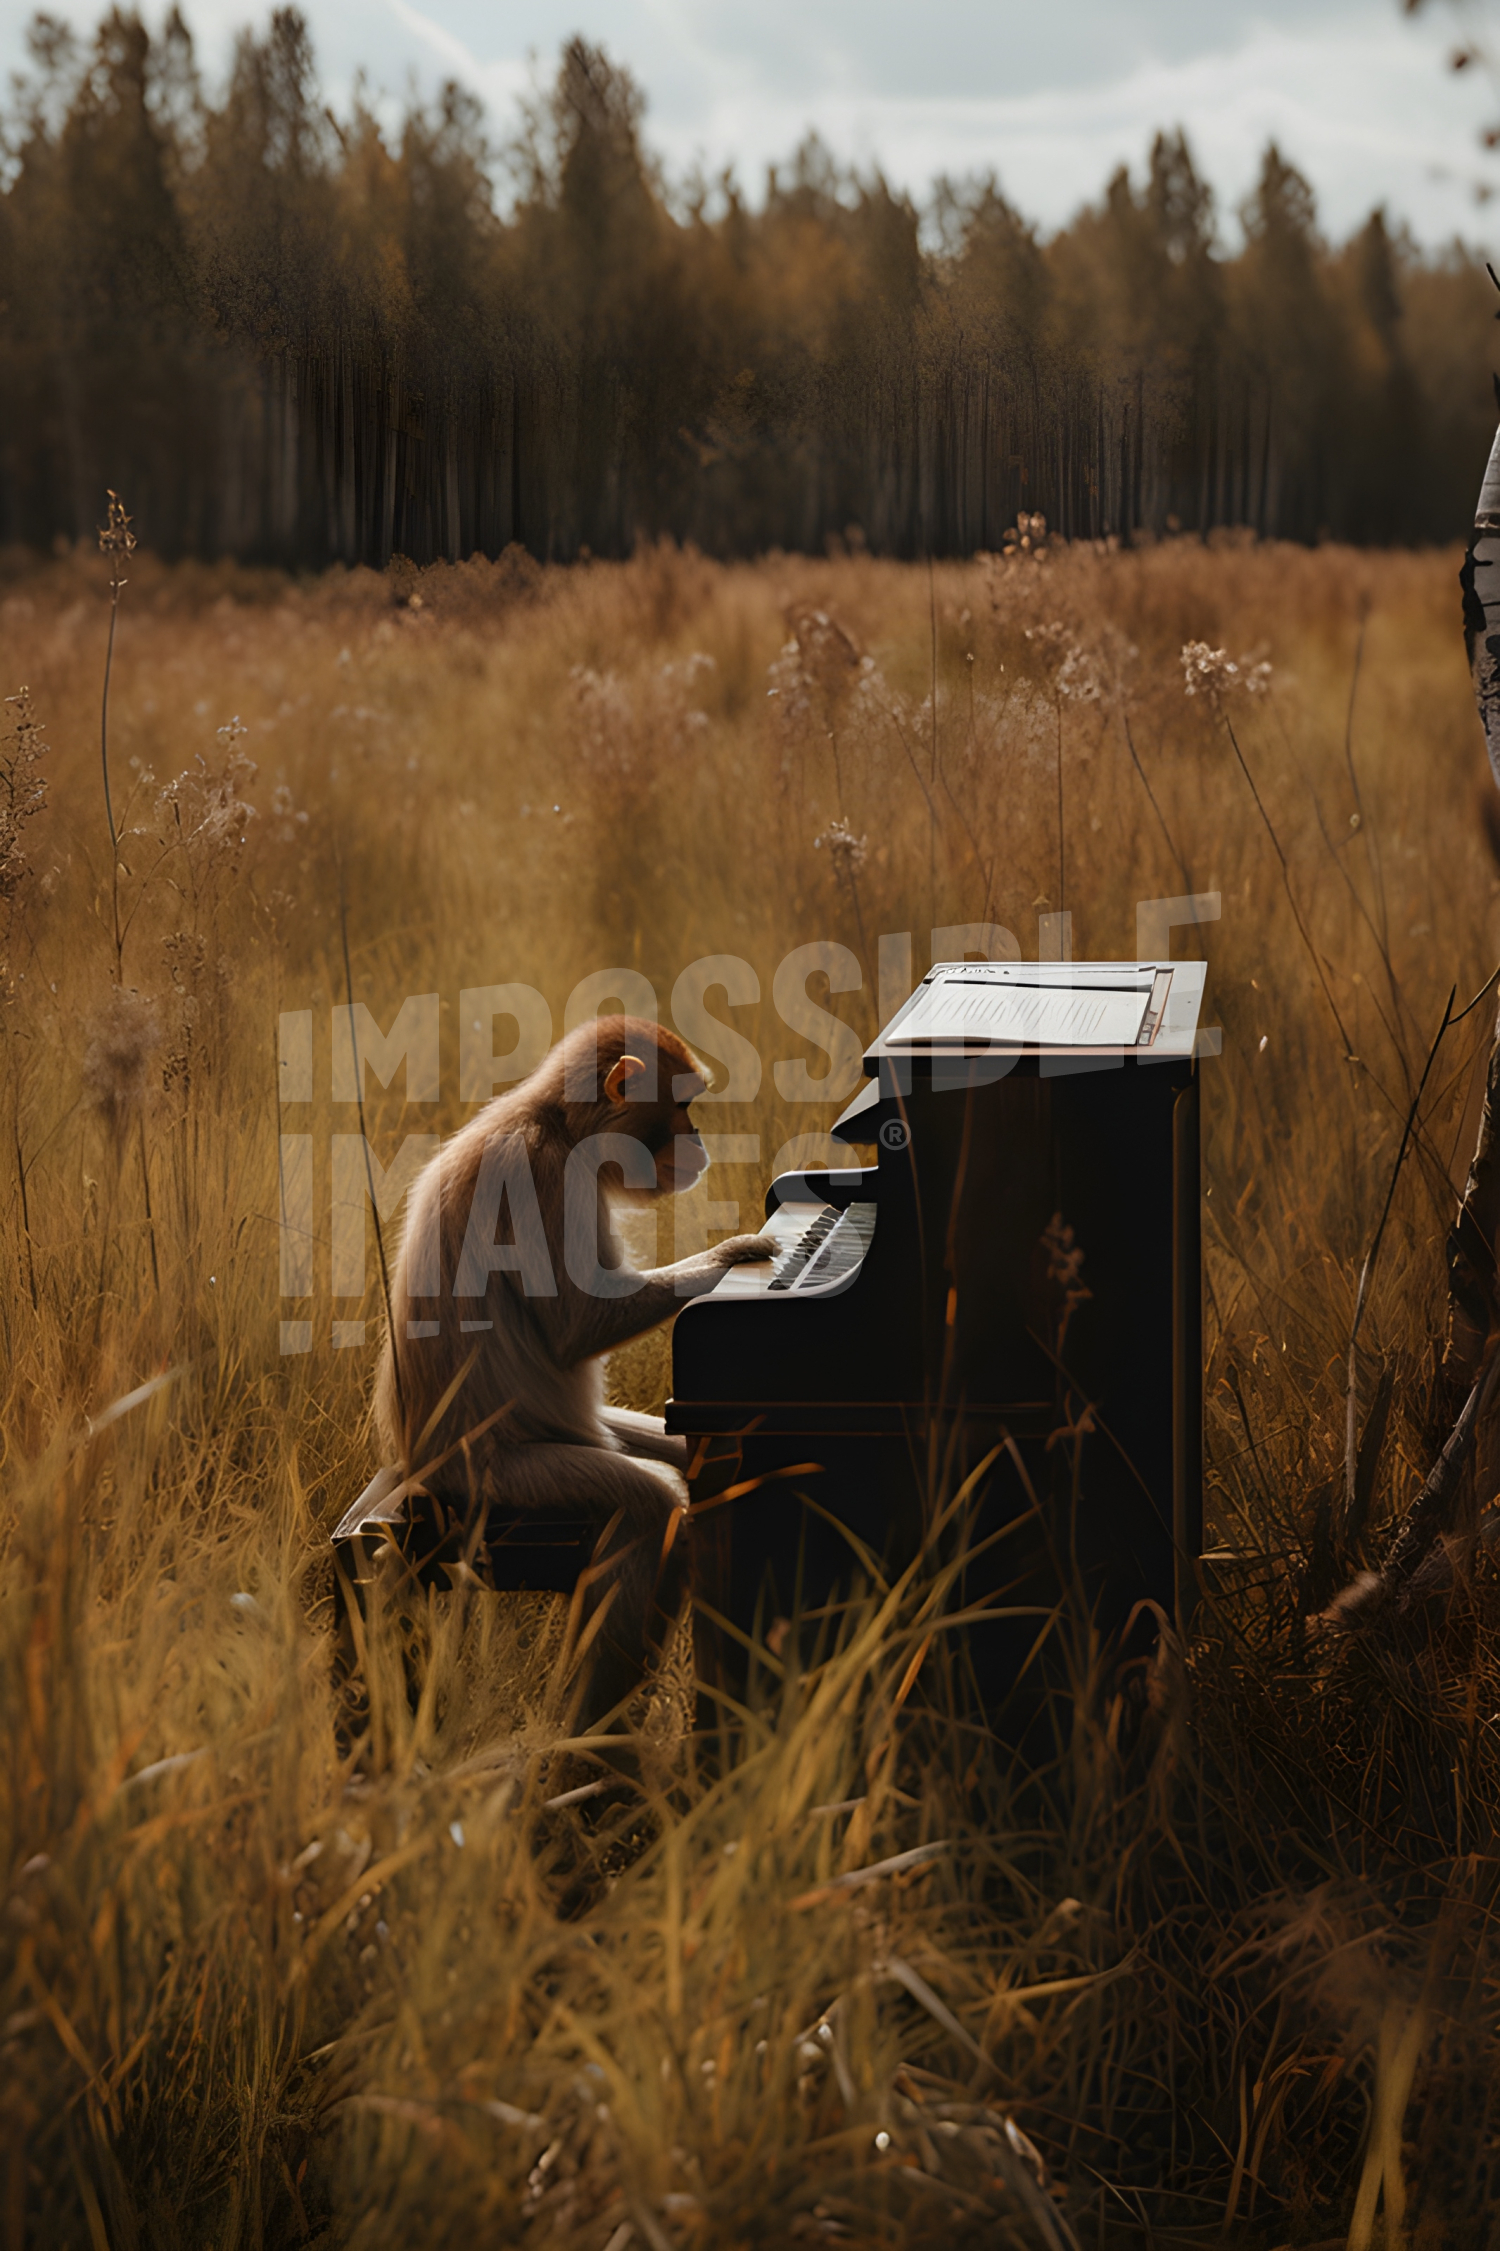 A monkey sitting at a piano in a field